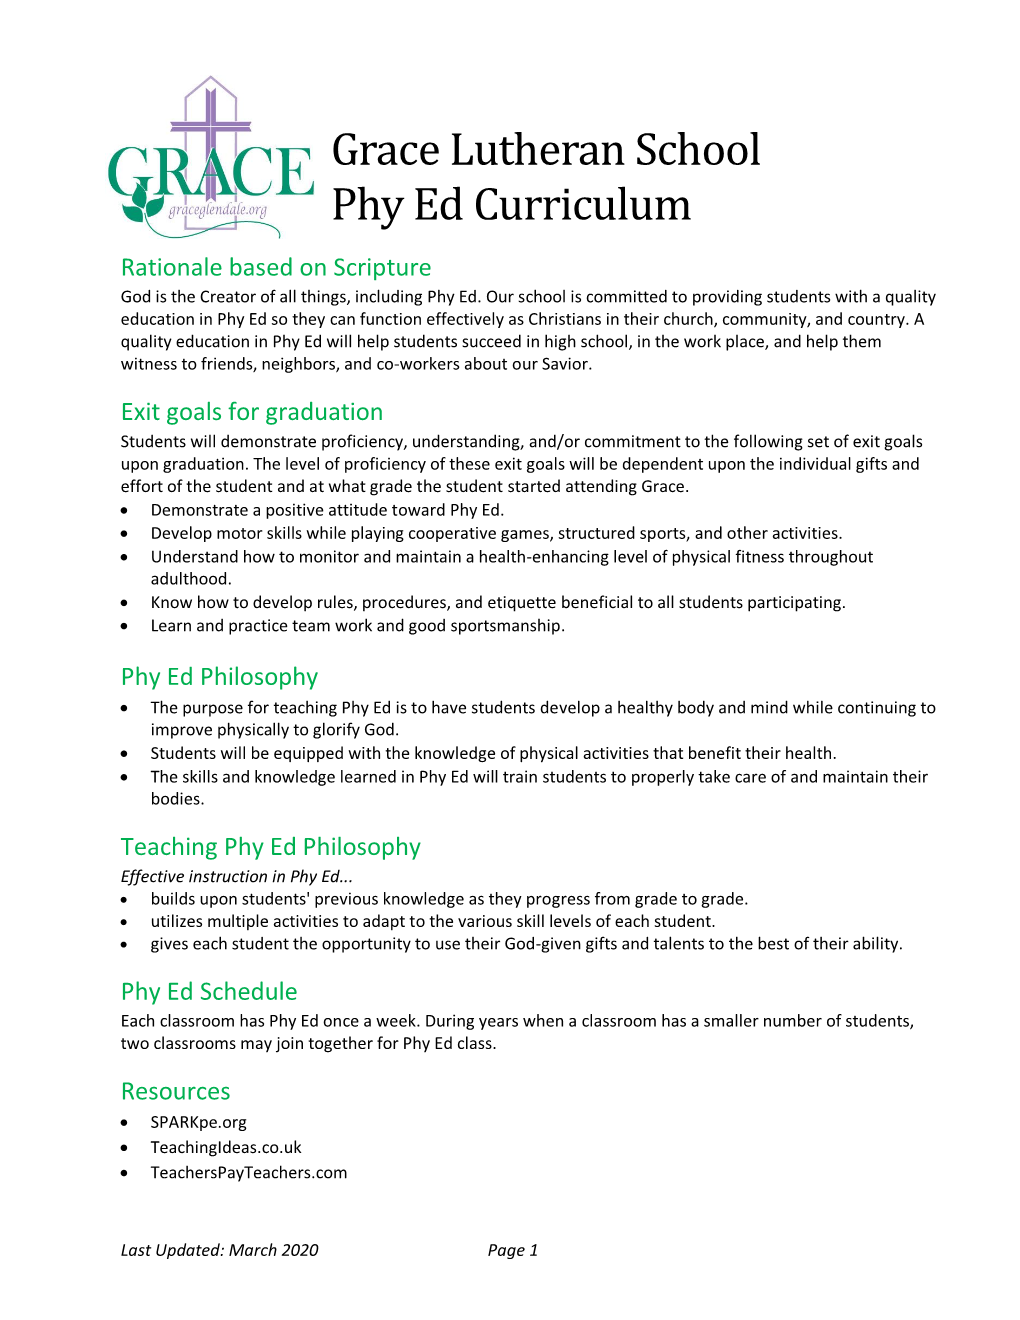 Grace Lutheran School Phy Ed Curriculum Rationale Based on Scripture God Is the Creator of All Things, Including Phy Ed